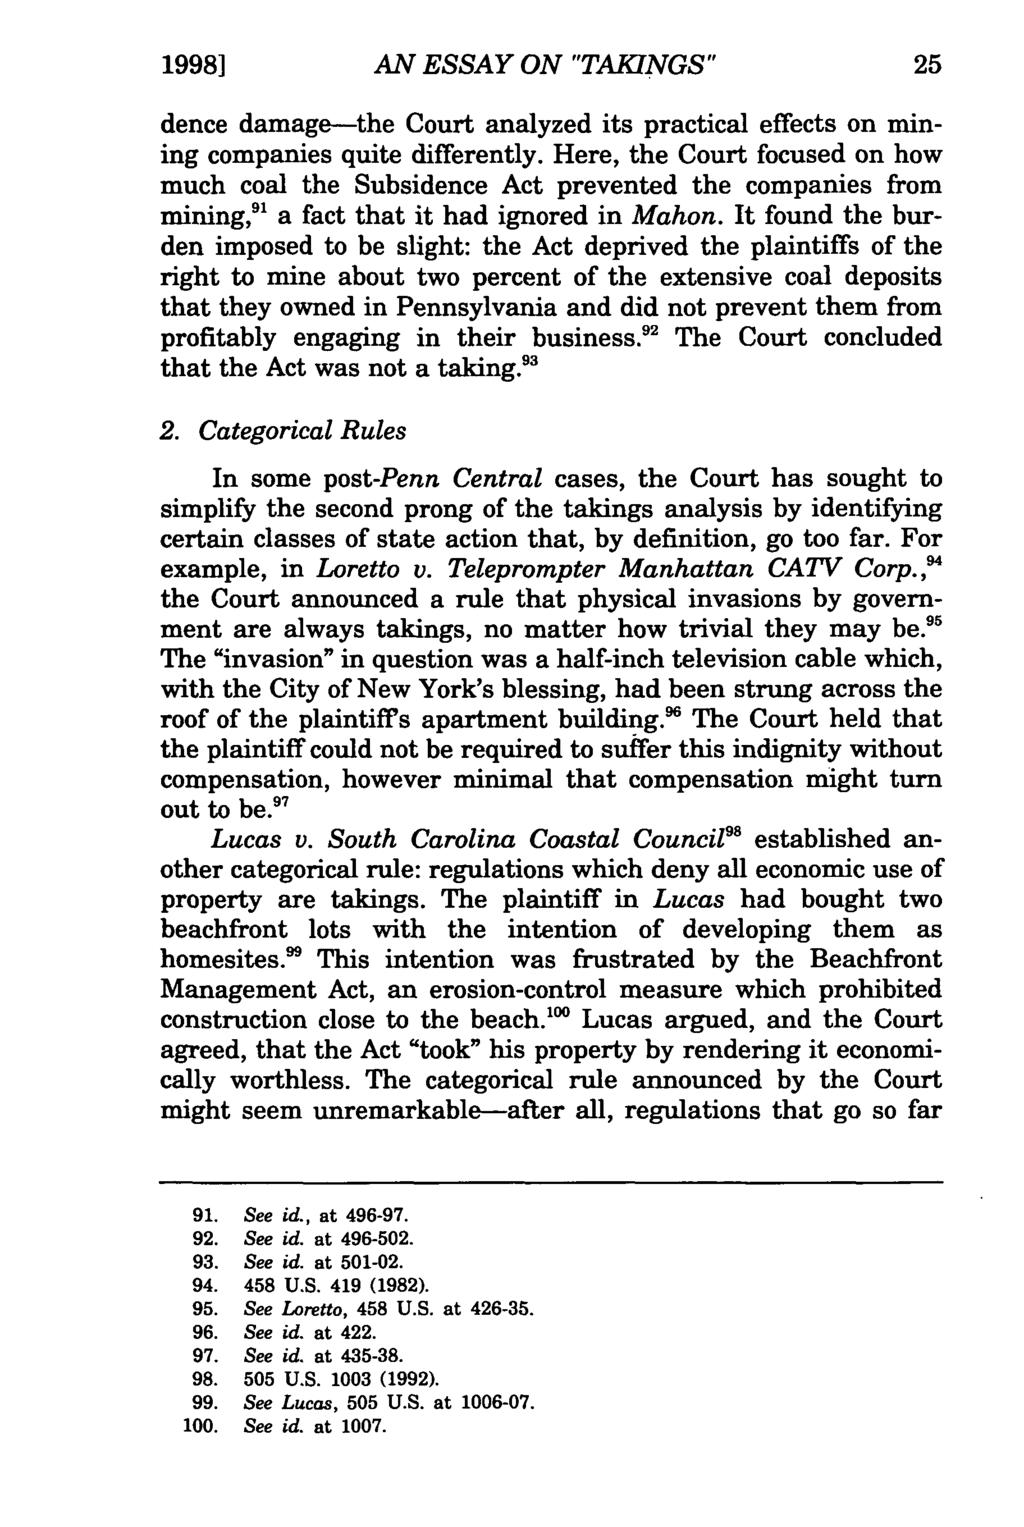 1998] Clifford AN and ESSAY Huff: An ON Essay on "TAKINGS" Takings dence damage-the Court analyzed its practical effects on mining companies quite differently.